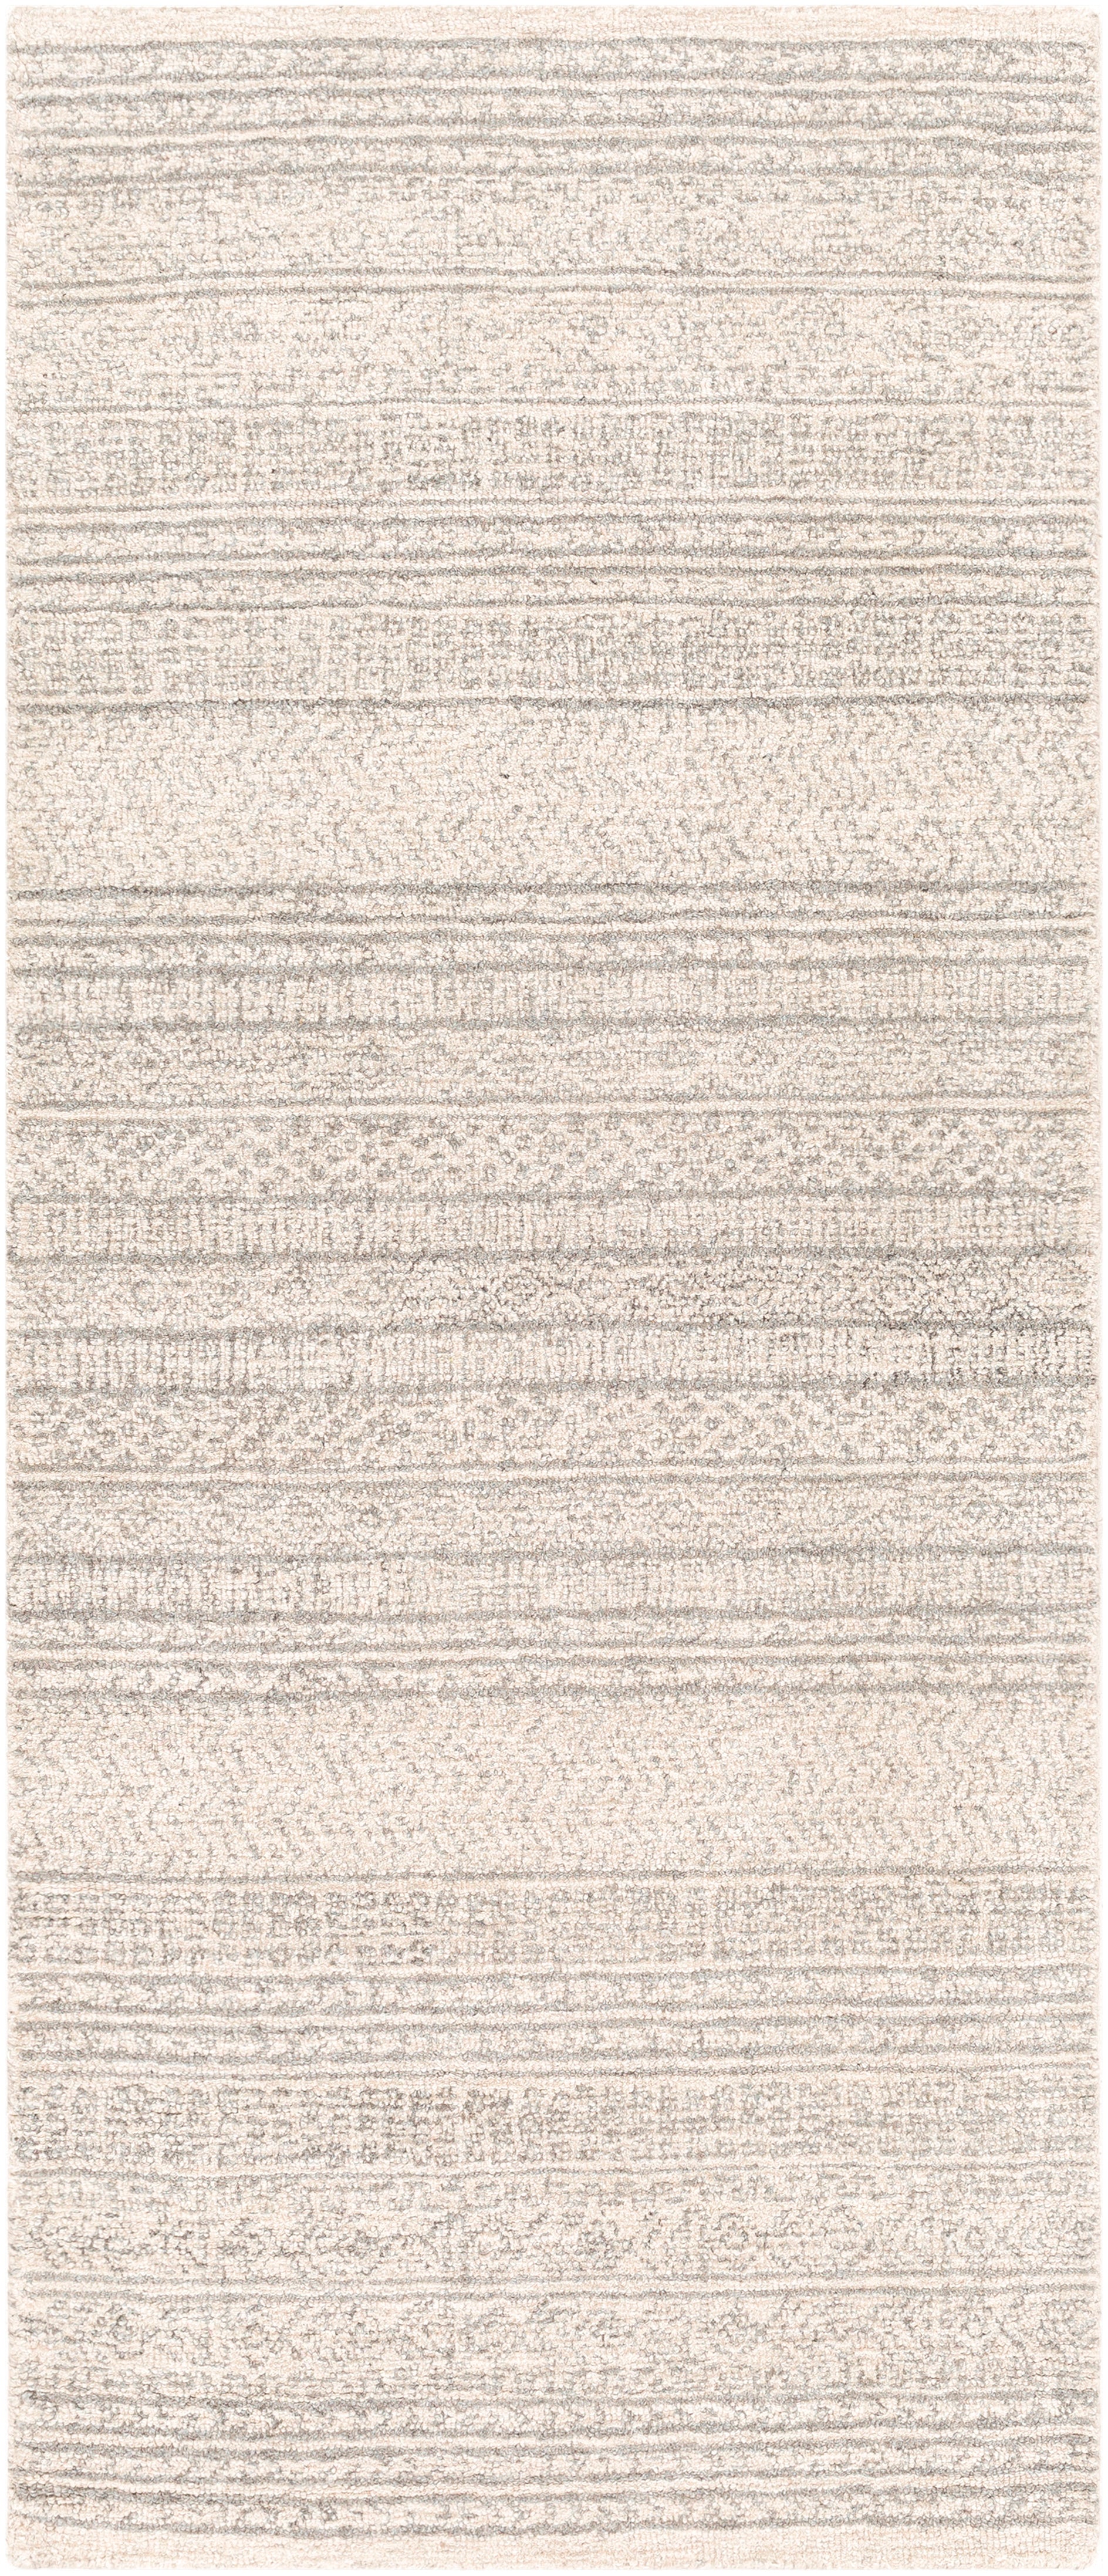 The Pakse Rug has a low pile and is hand tufted from 100% wool.